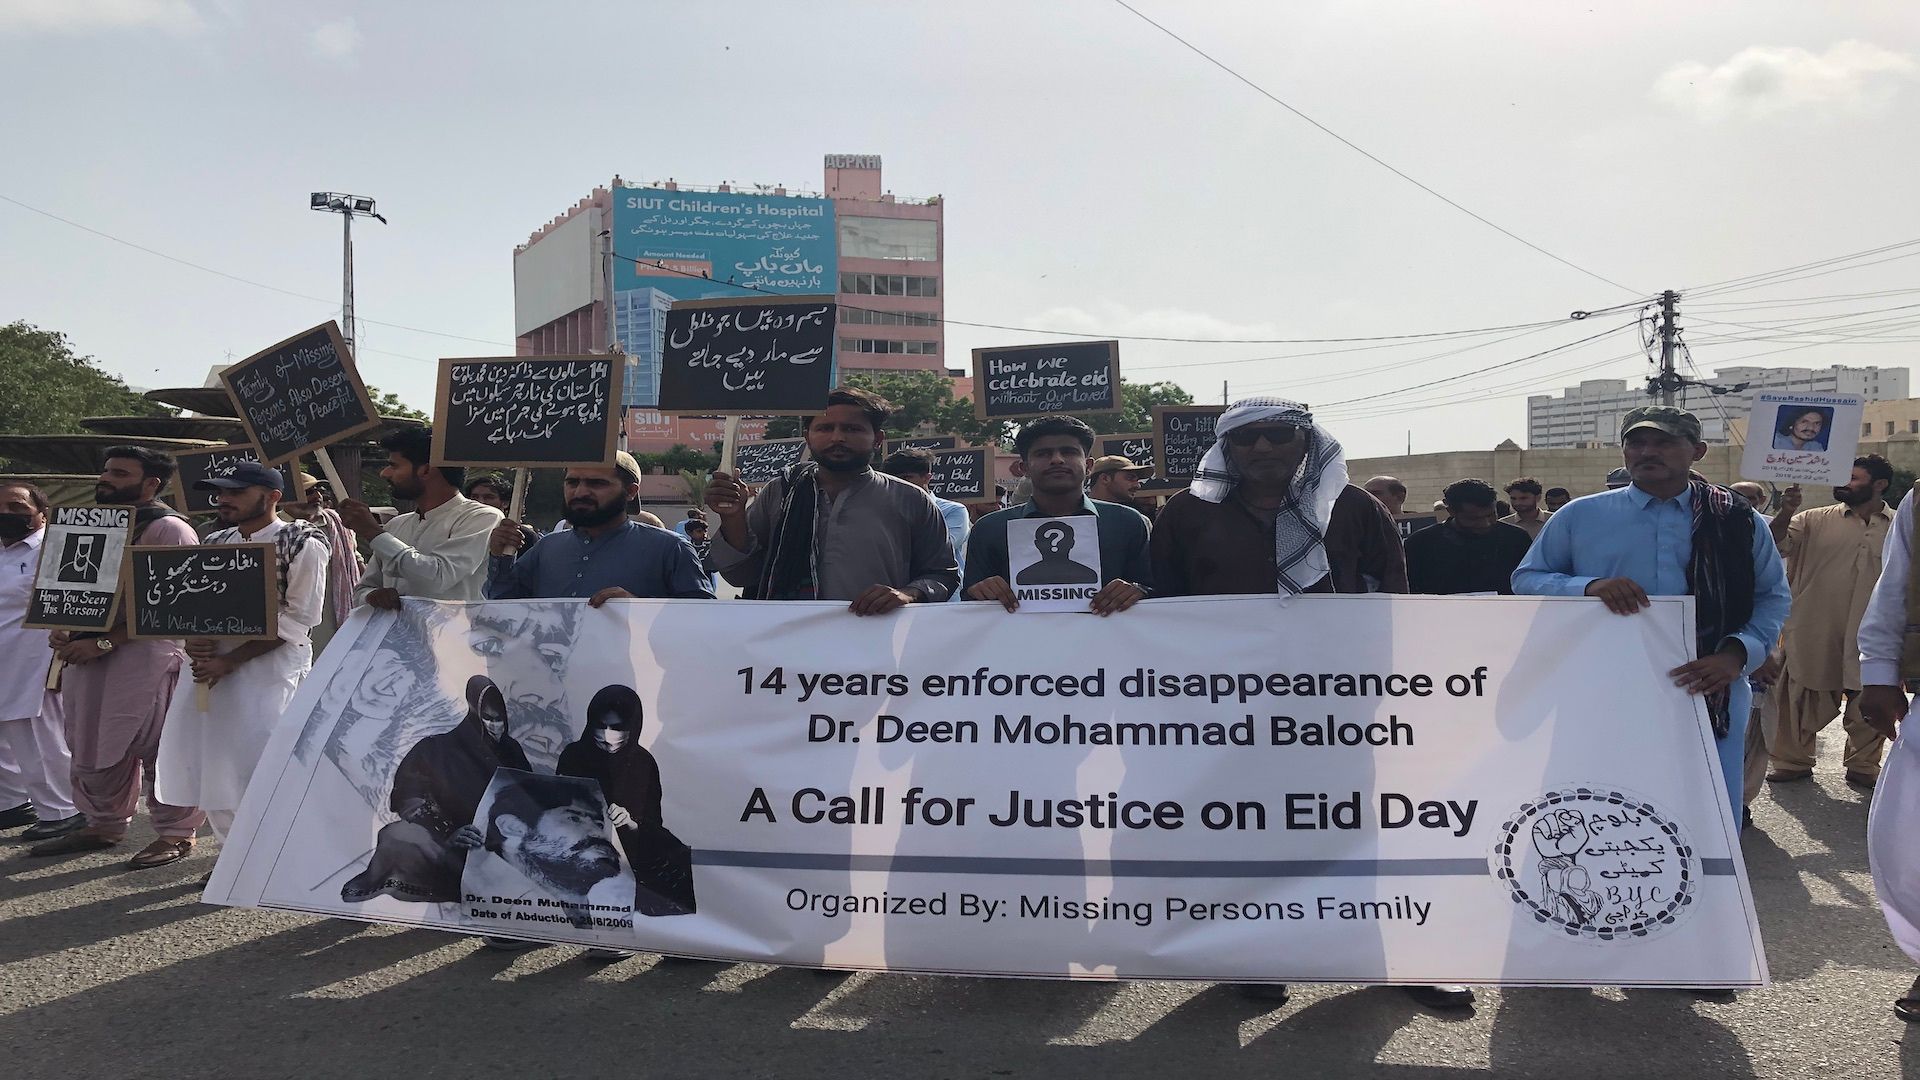 Balochistan’s Cry For Justice: Community Urges Release of Missing Persons Ahead Of Eid-ul-Adha